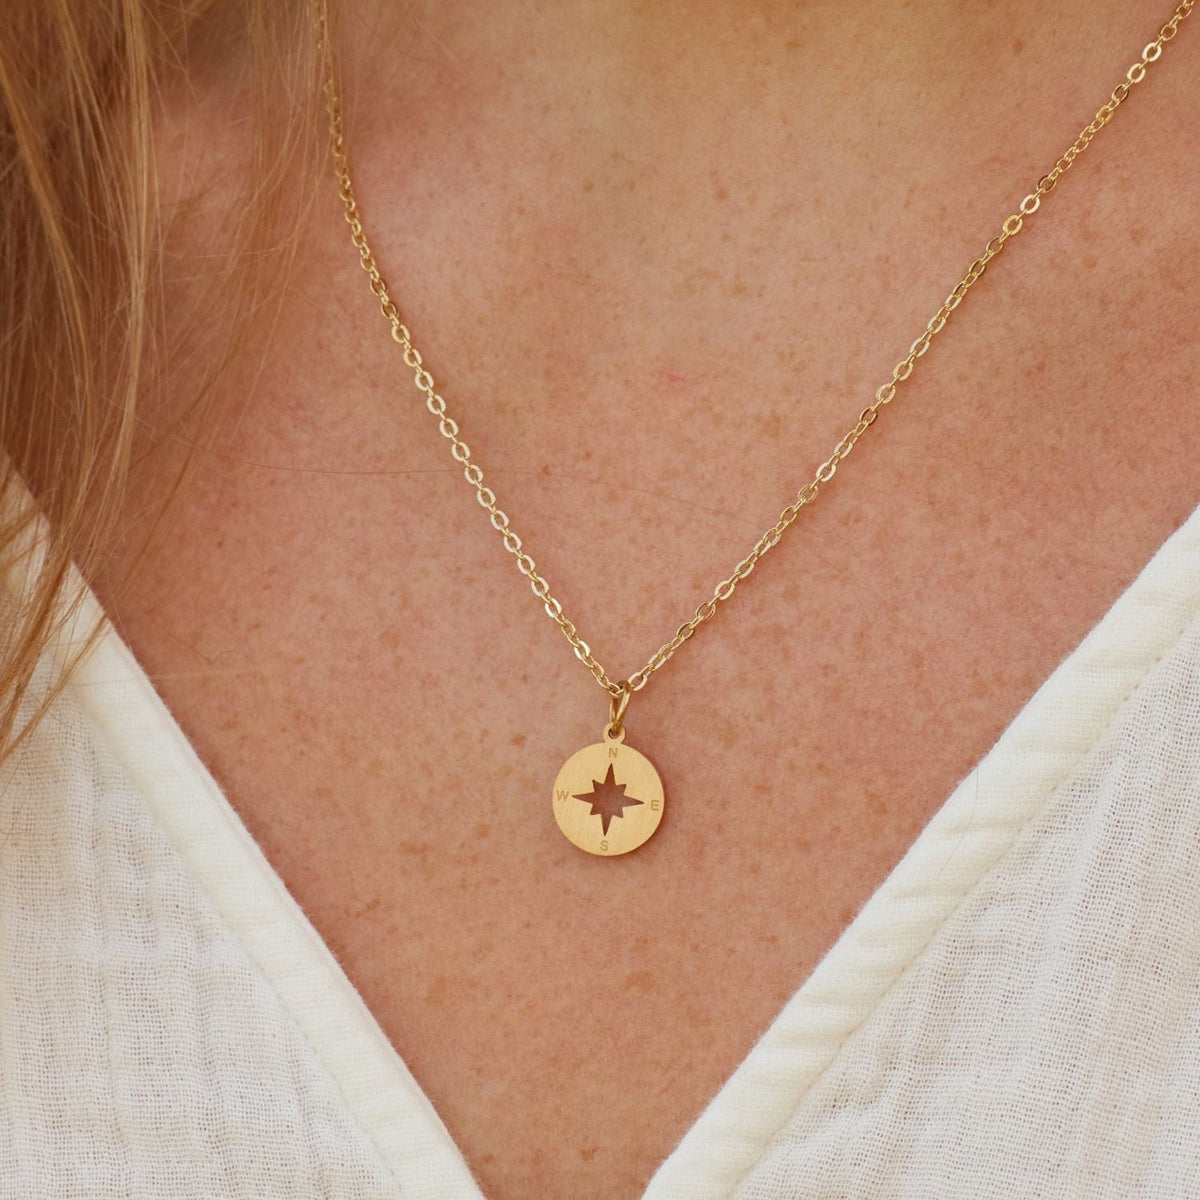 Gift for New Chapter | Be Confident | Compass Necklace